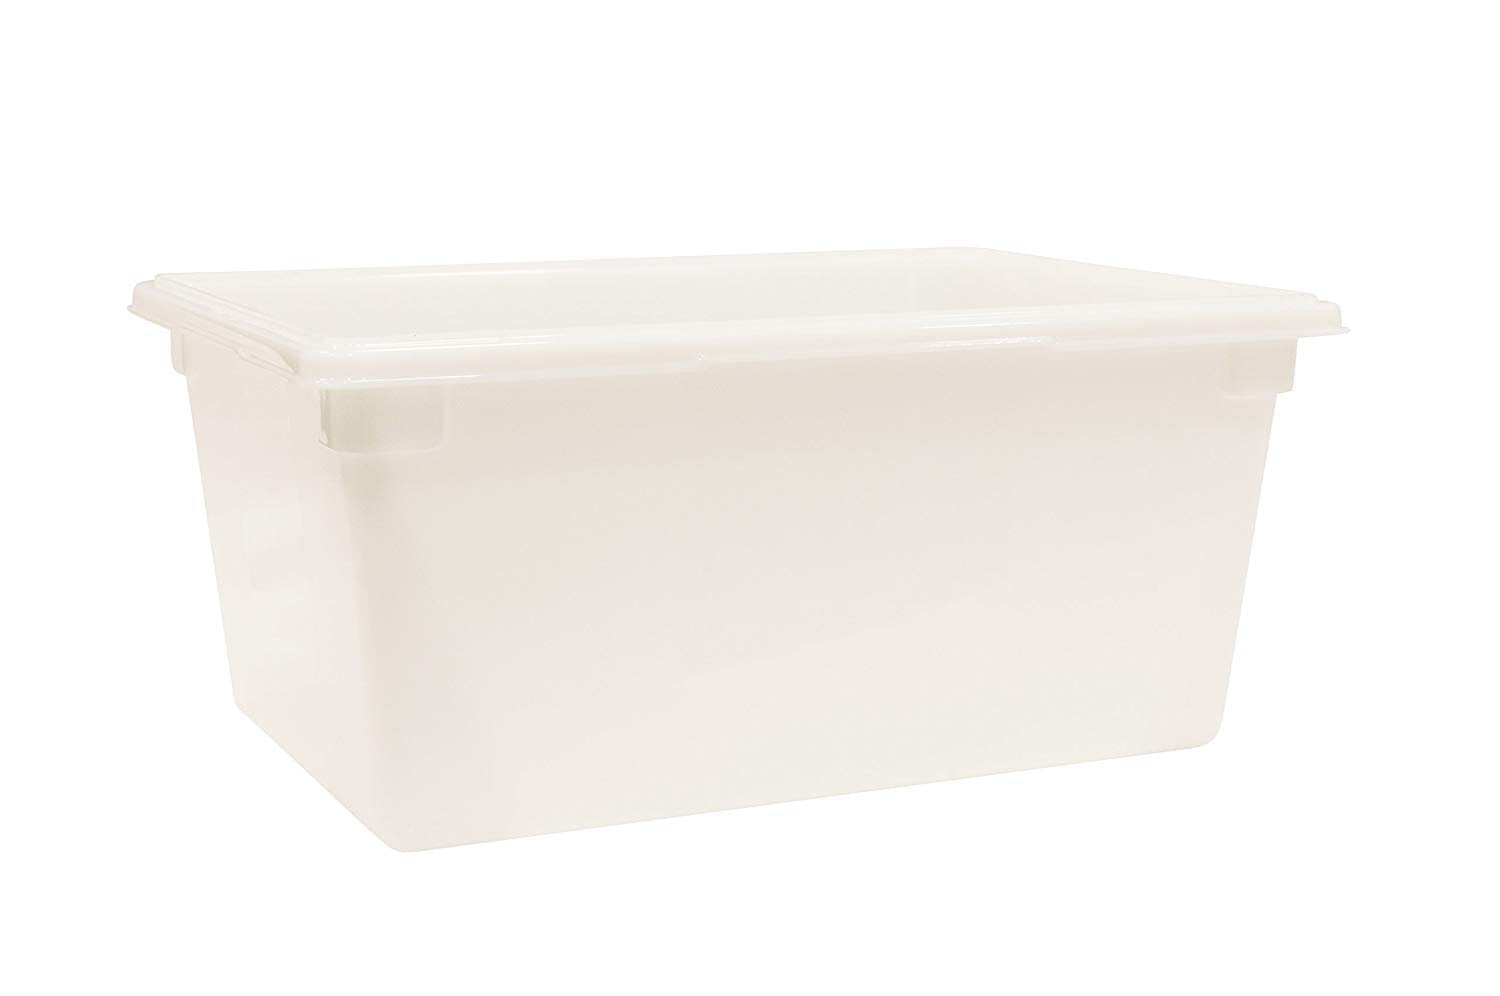 Rubbermaid Commercial Food/Tote Boxes 5gal 12w x 18d x 9h Clear 3304CLE